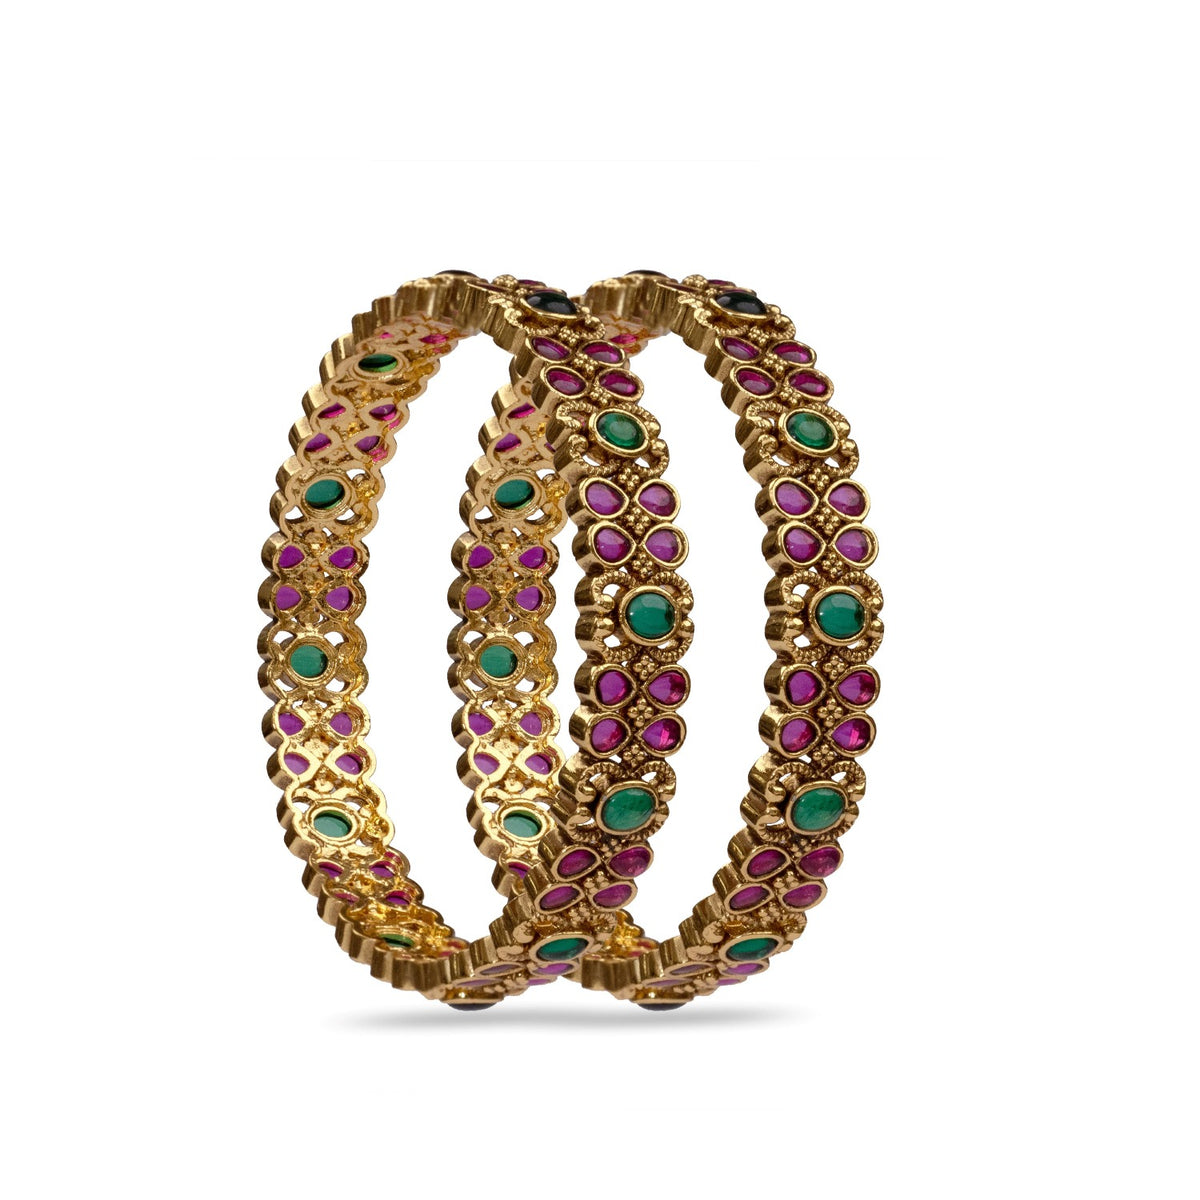 A close up image of a gold plated bracelet with green and red gemstones.